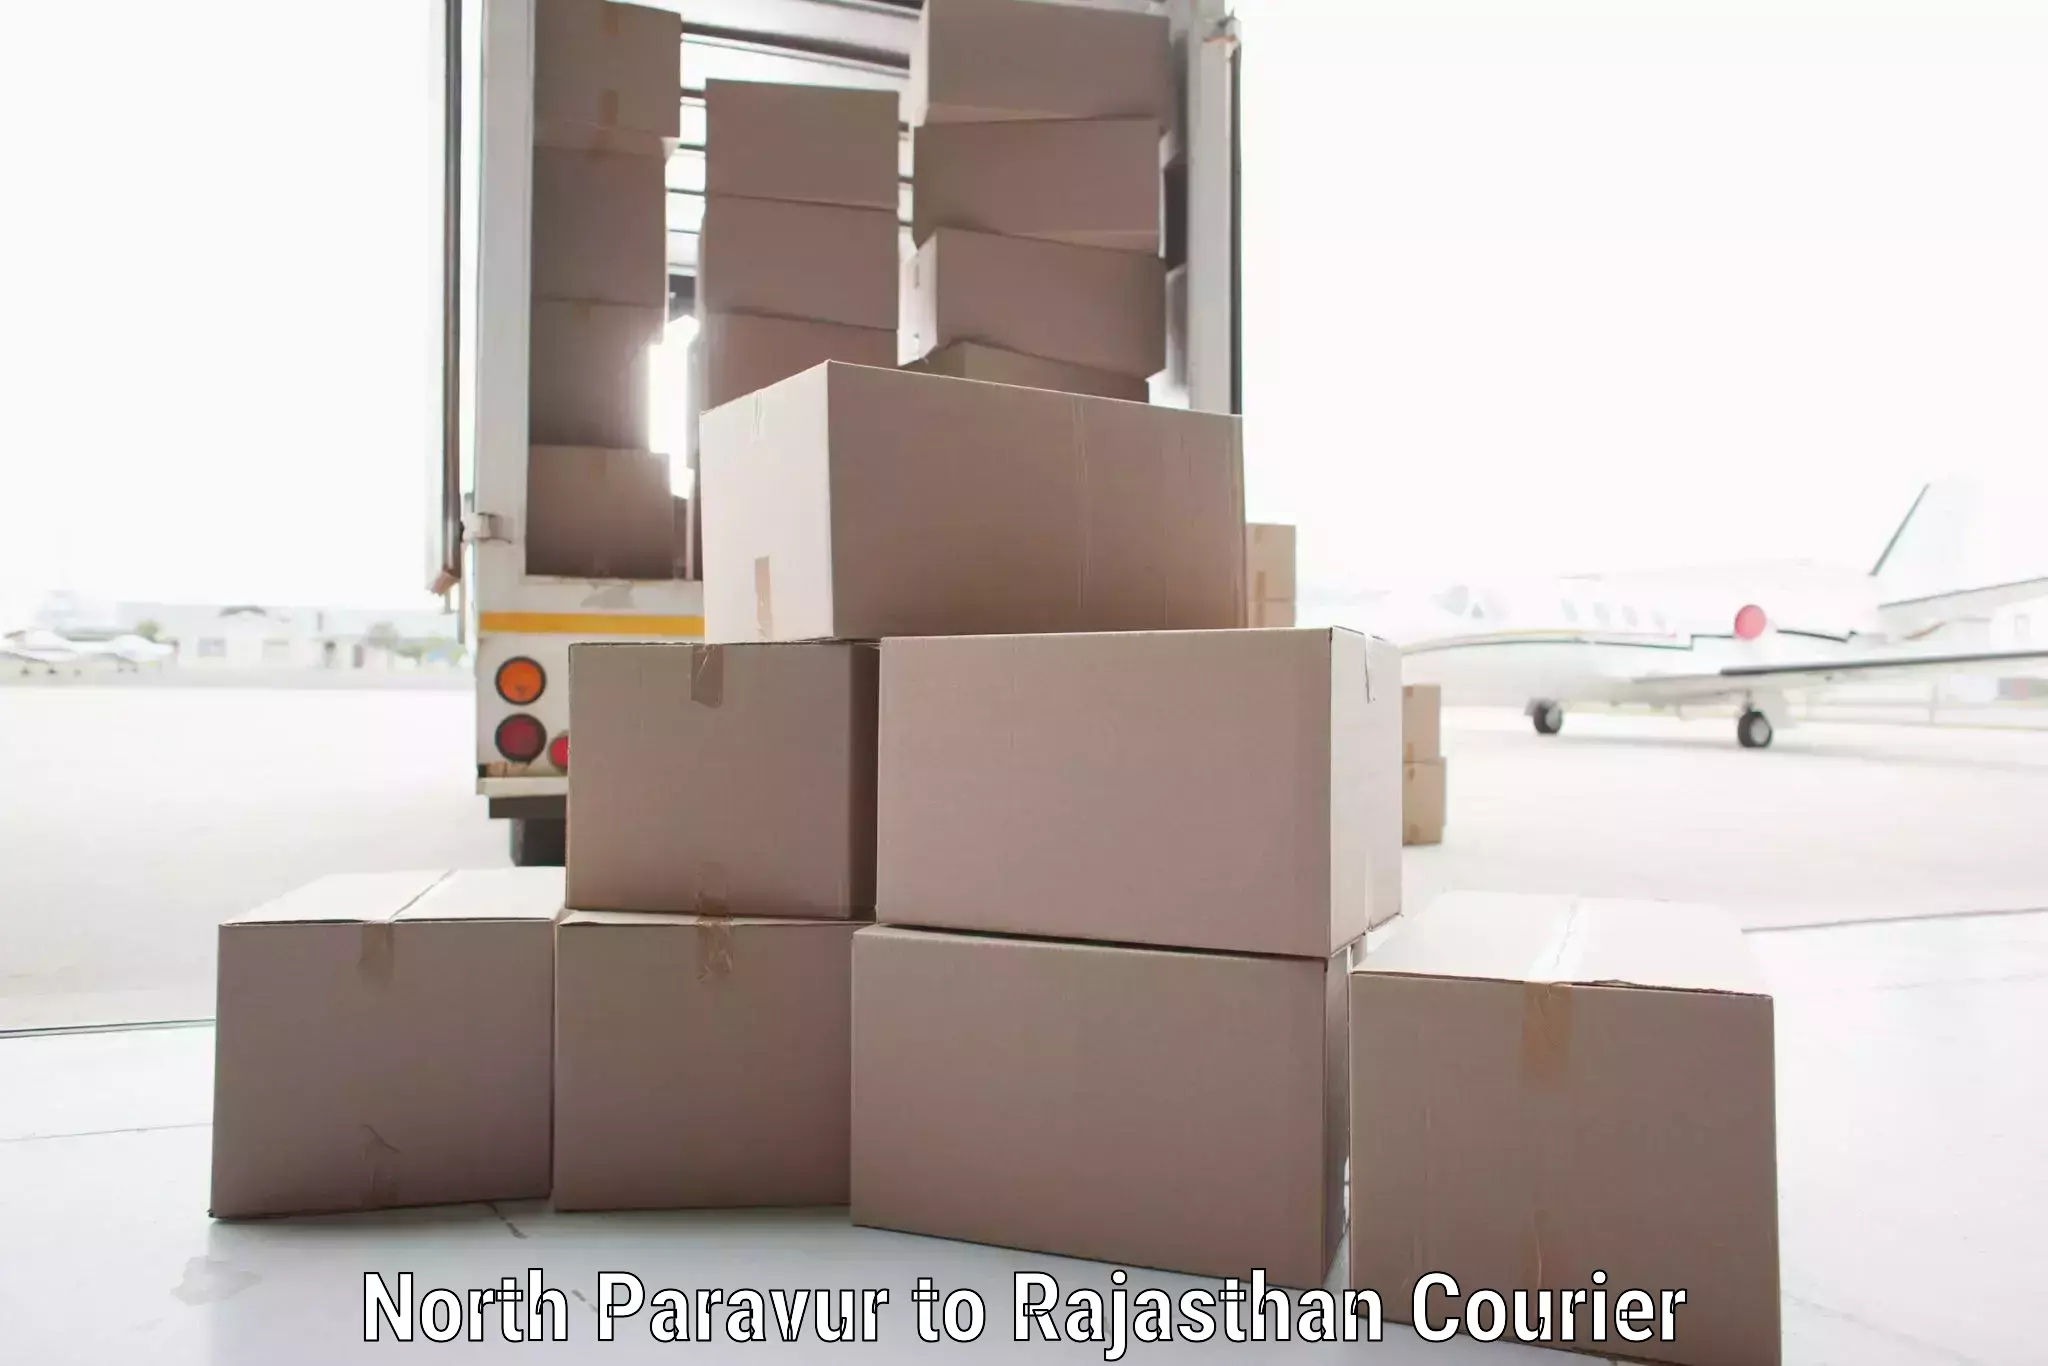 Global shipping networks in North Paravur to NIT Jaipur